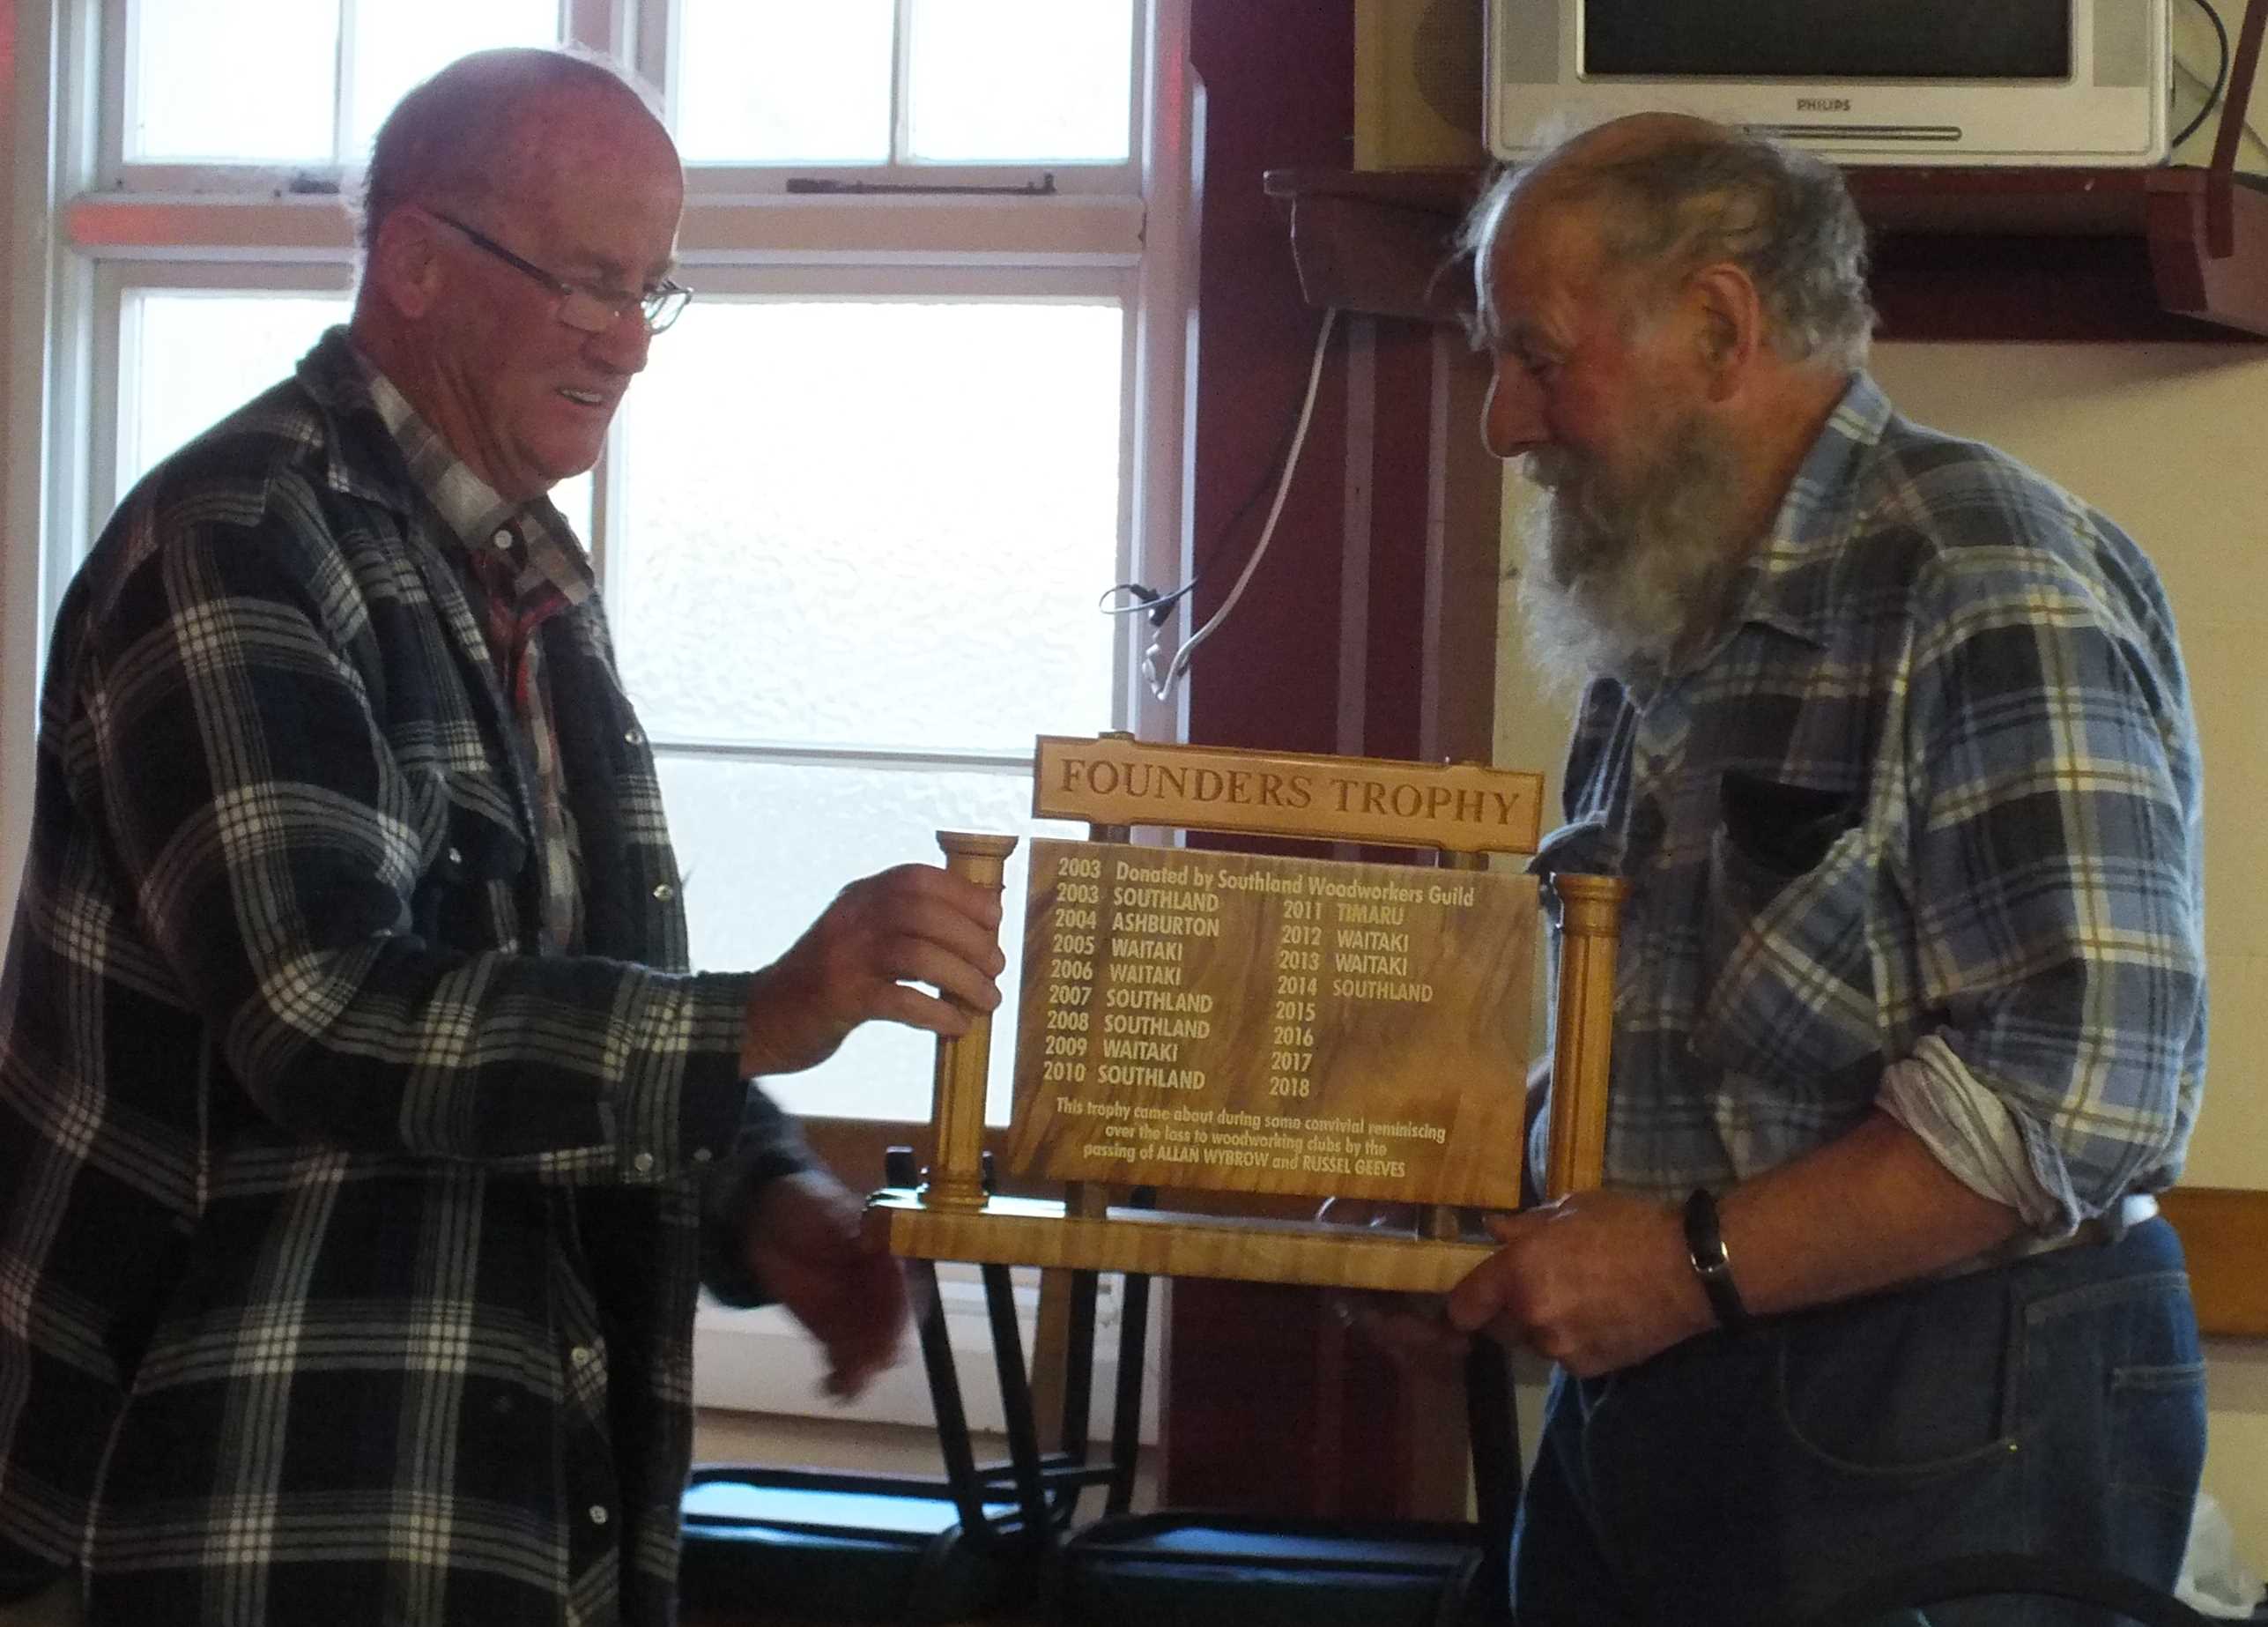 Rex accepts the Founders Trophy on behalf of the club